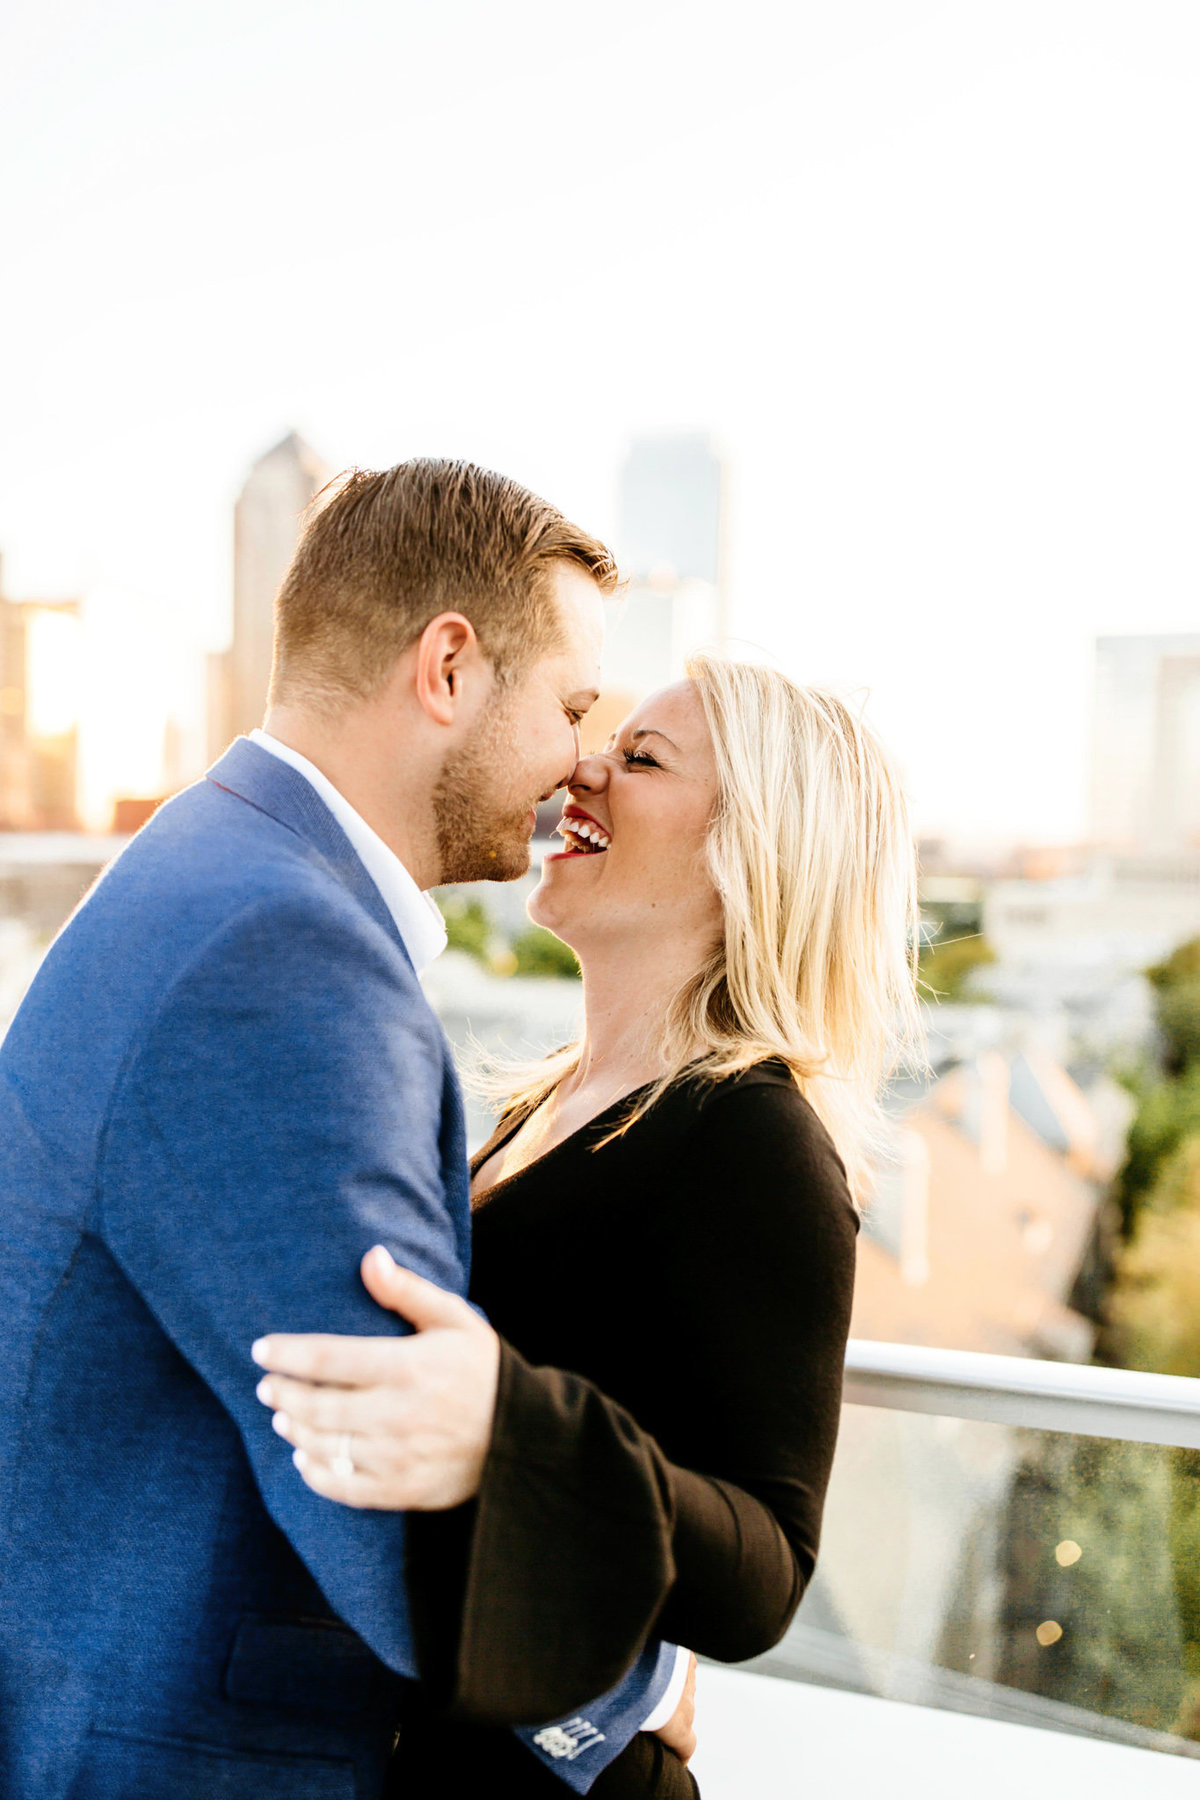 Eric & Megan - Downtown Dallas Rooftop Proposal & Engagement Session-101